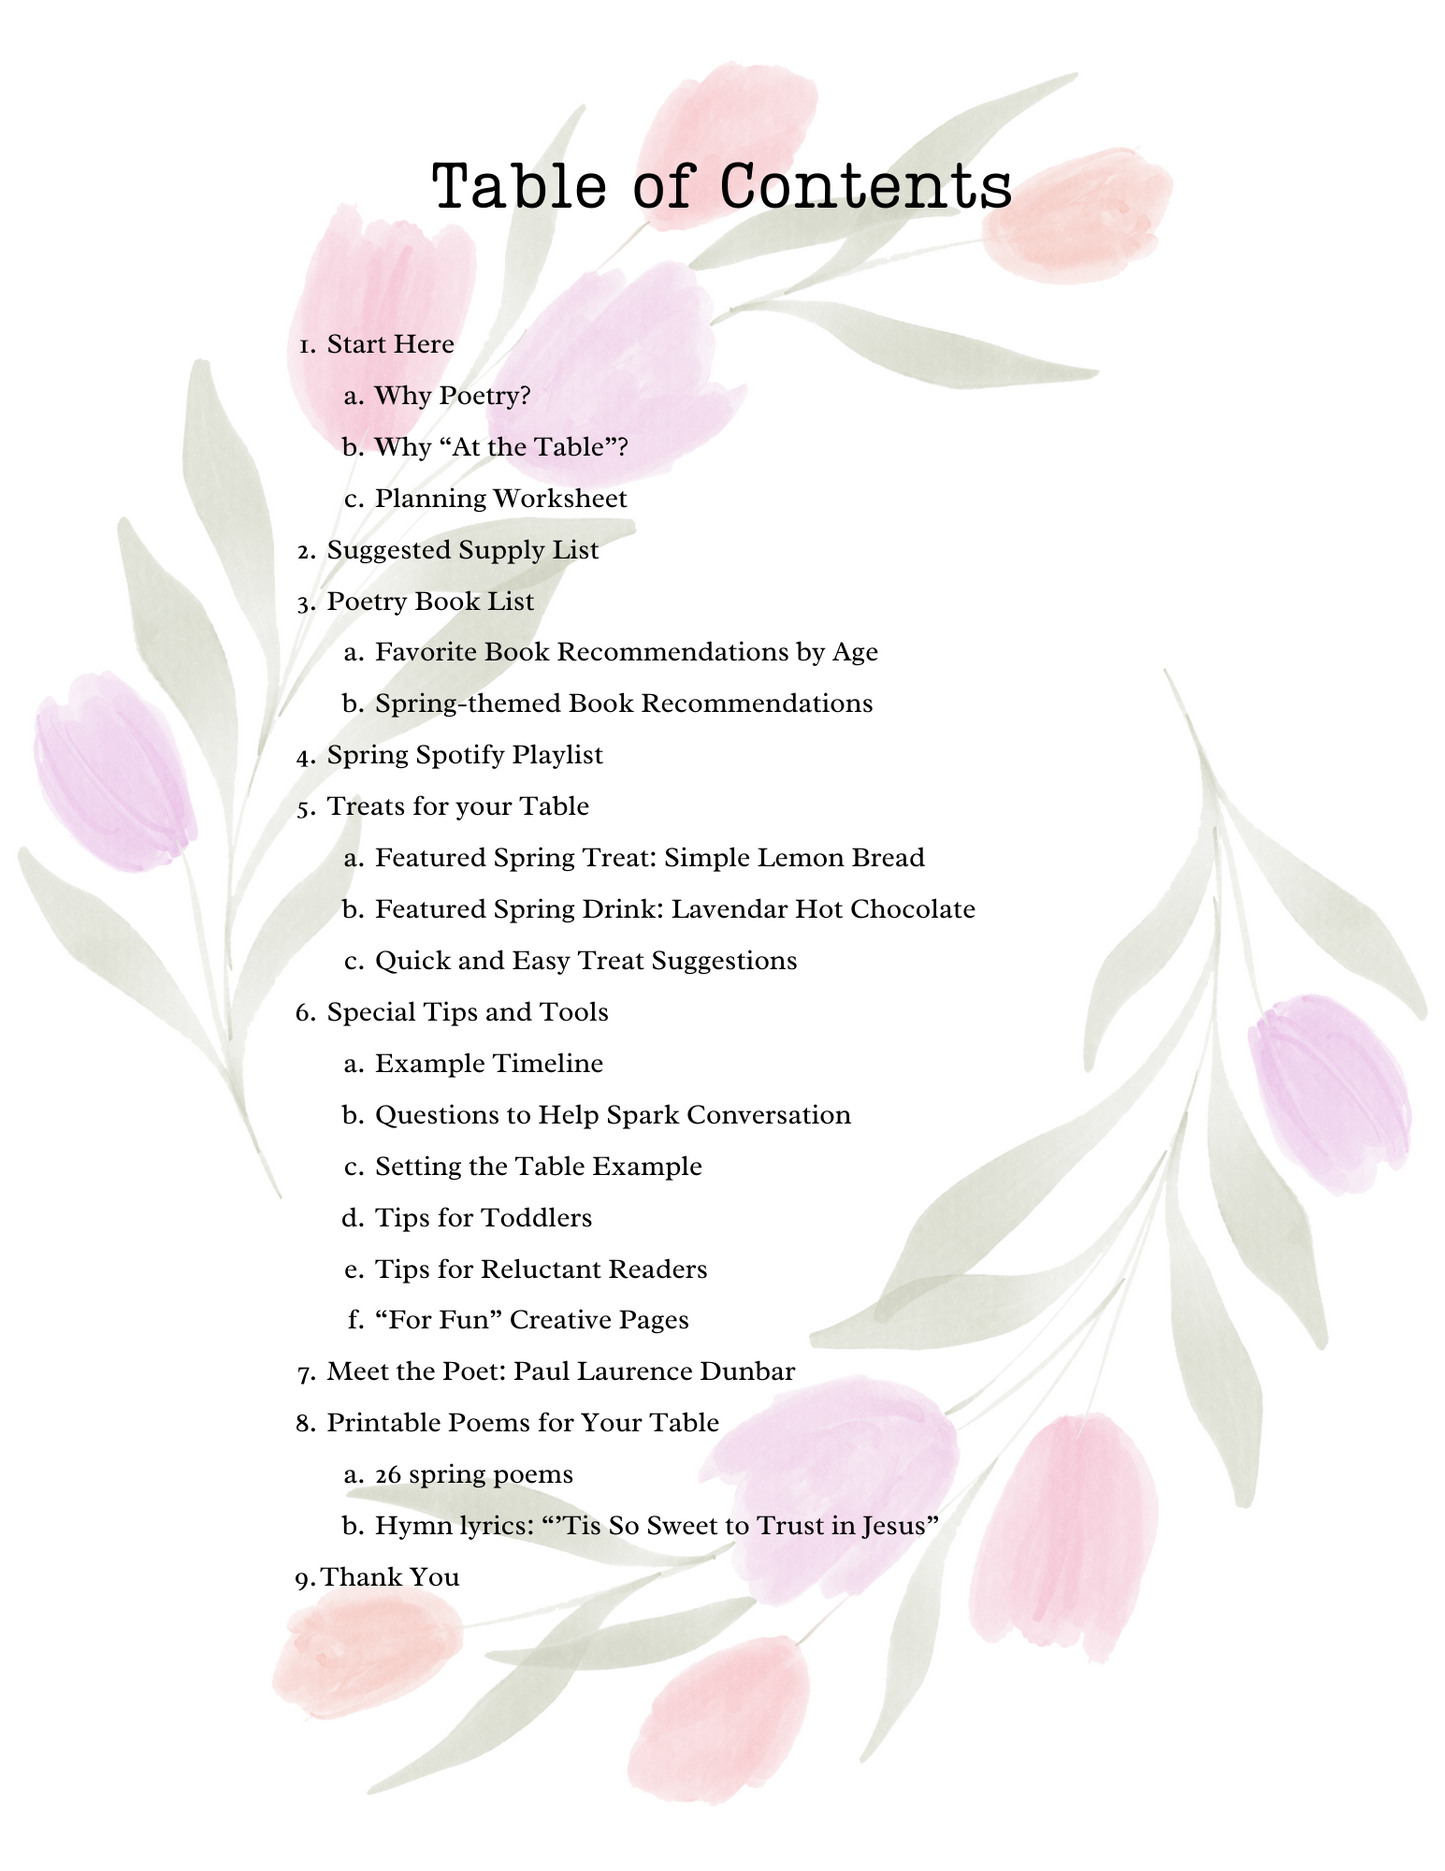 [Spring COMPLETE GUIDE] Poetry at the Table: Getting Started Guide